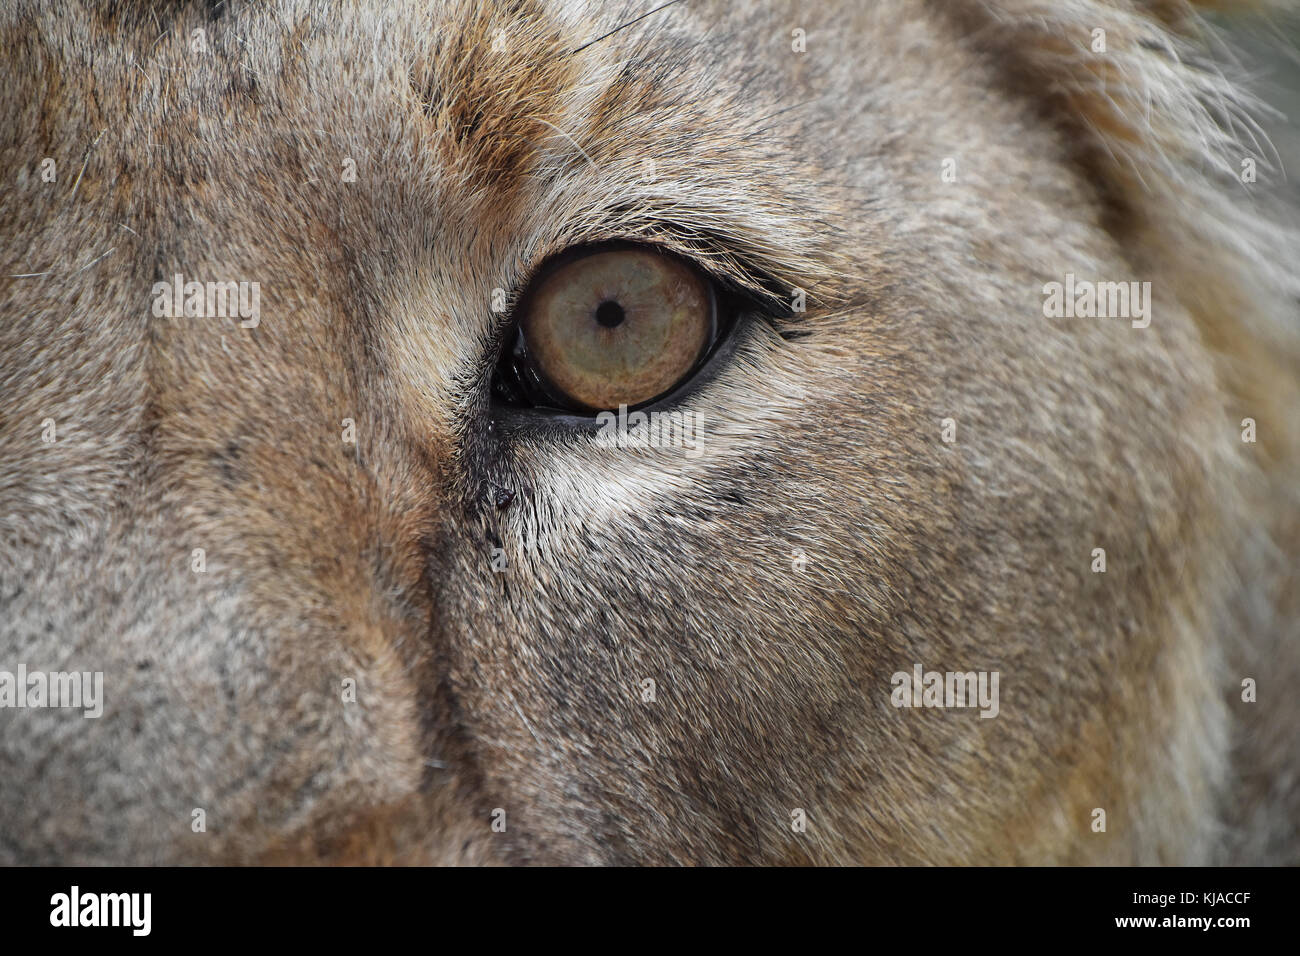 Extreme detailed close up of female African lioness eye looking at camera Stock Photo